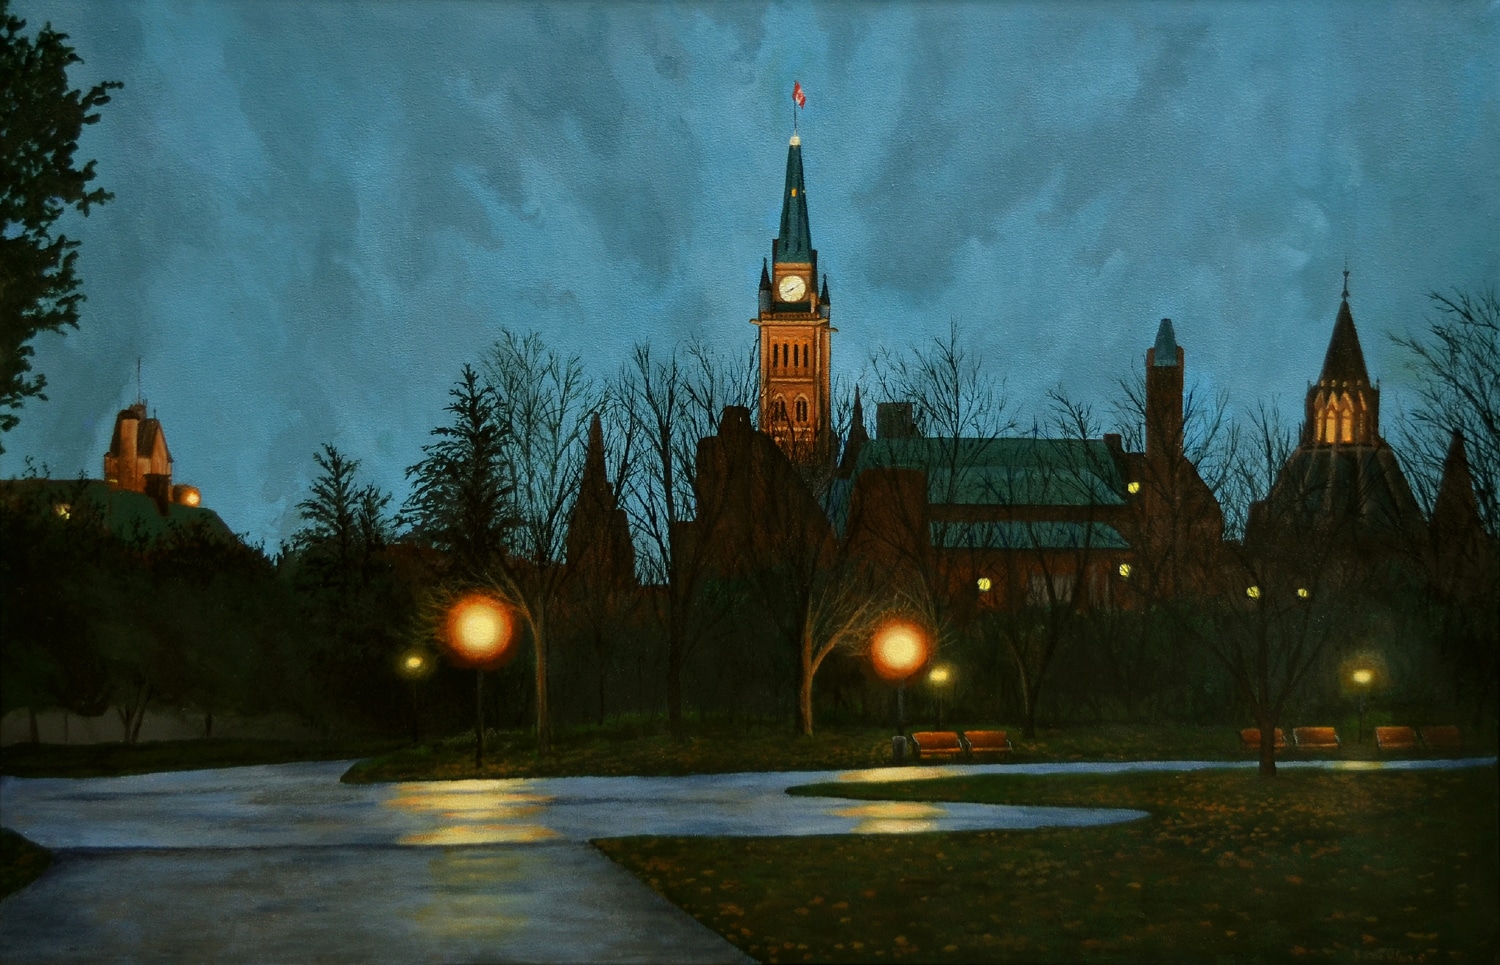 STEVE WILSON The Maple Leaf Forever (Parliament Hill), 2017, Acrylic on canvas, 26 x 40 inches, 66 x 102 cm